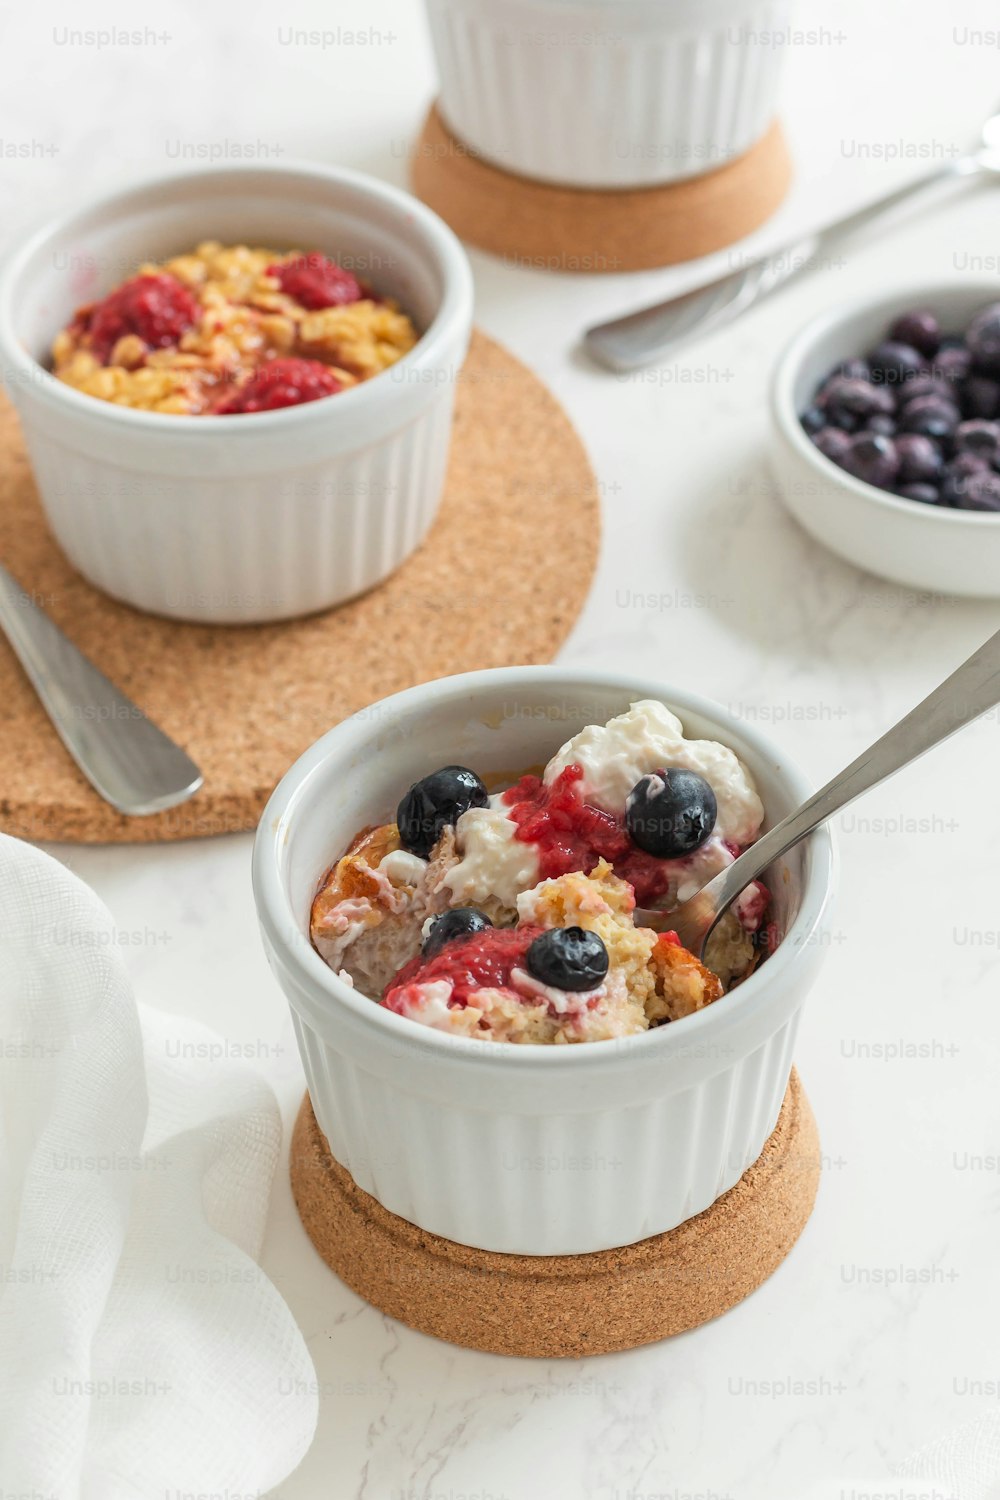 a bowl of oatmeal with berries and blueberries